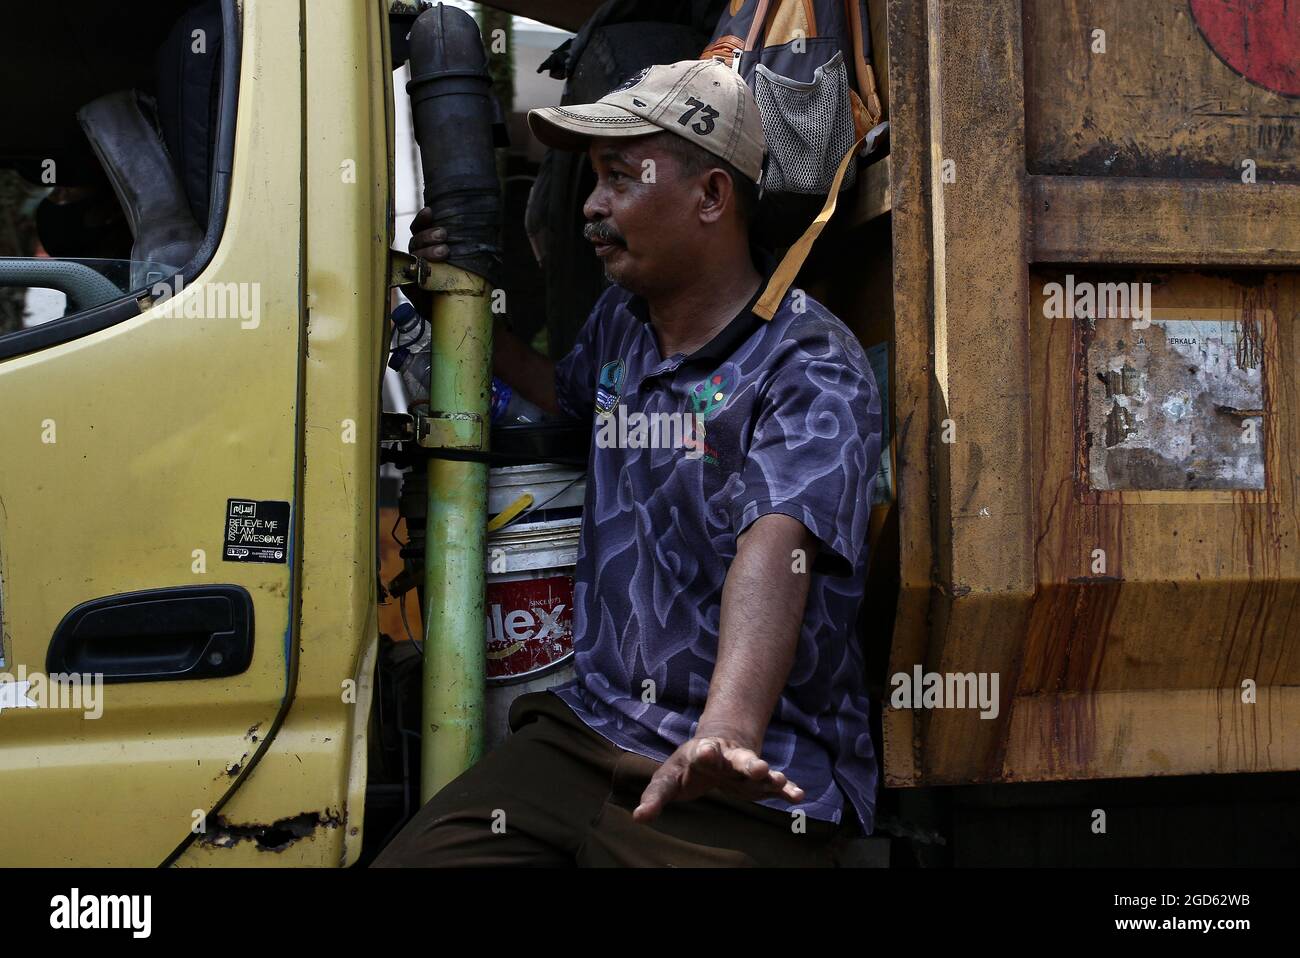 Bandung, West Java, Indonesia. A garbage man is in a garbage truck that goes around every house picking up trash. Stock Photo